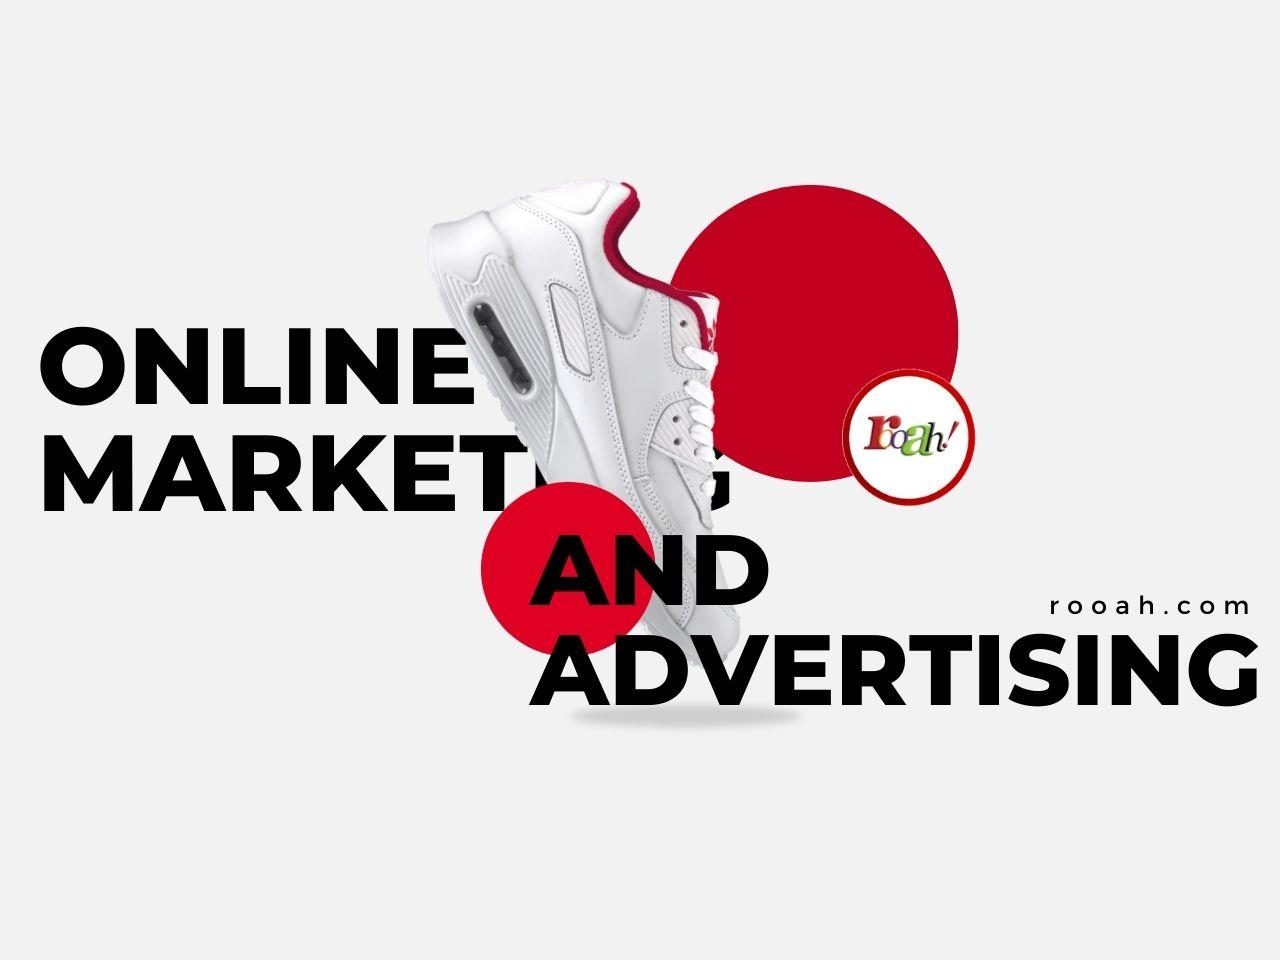 Online Marketing and Advertising